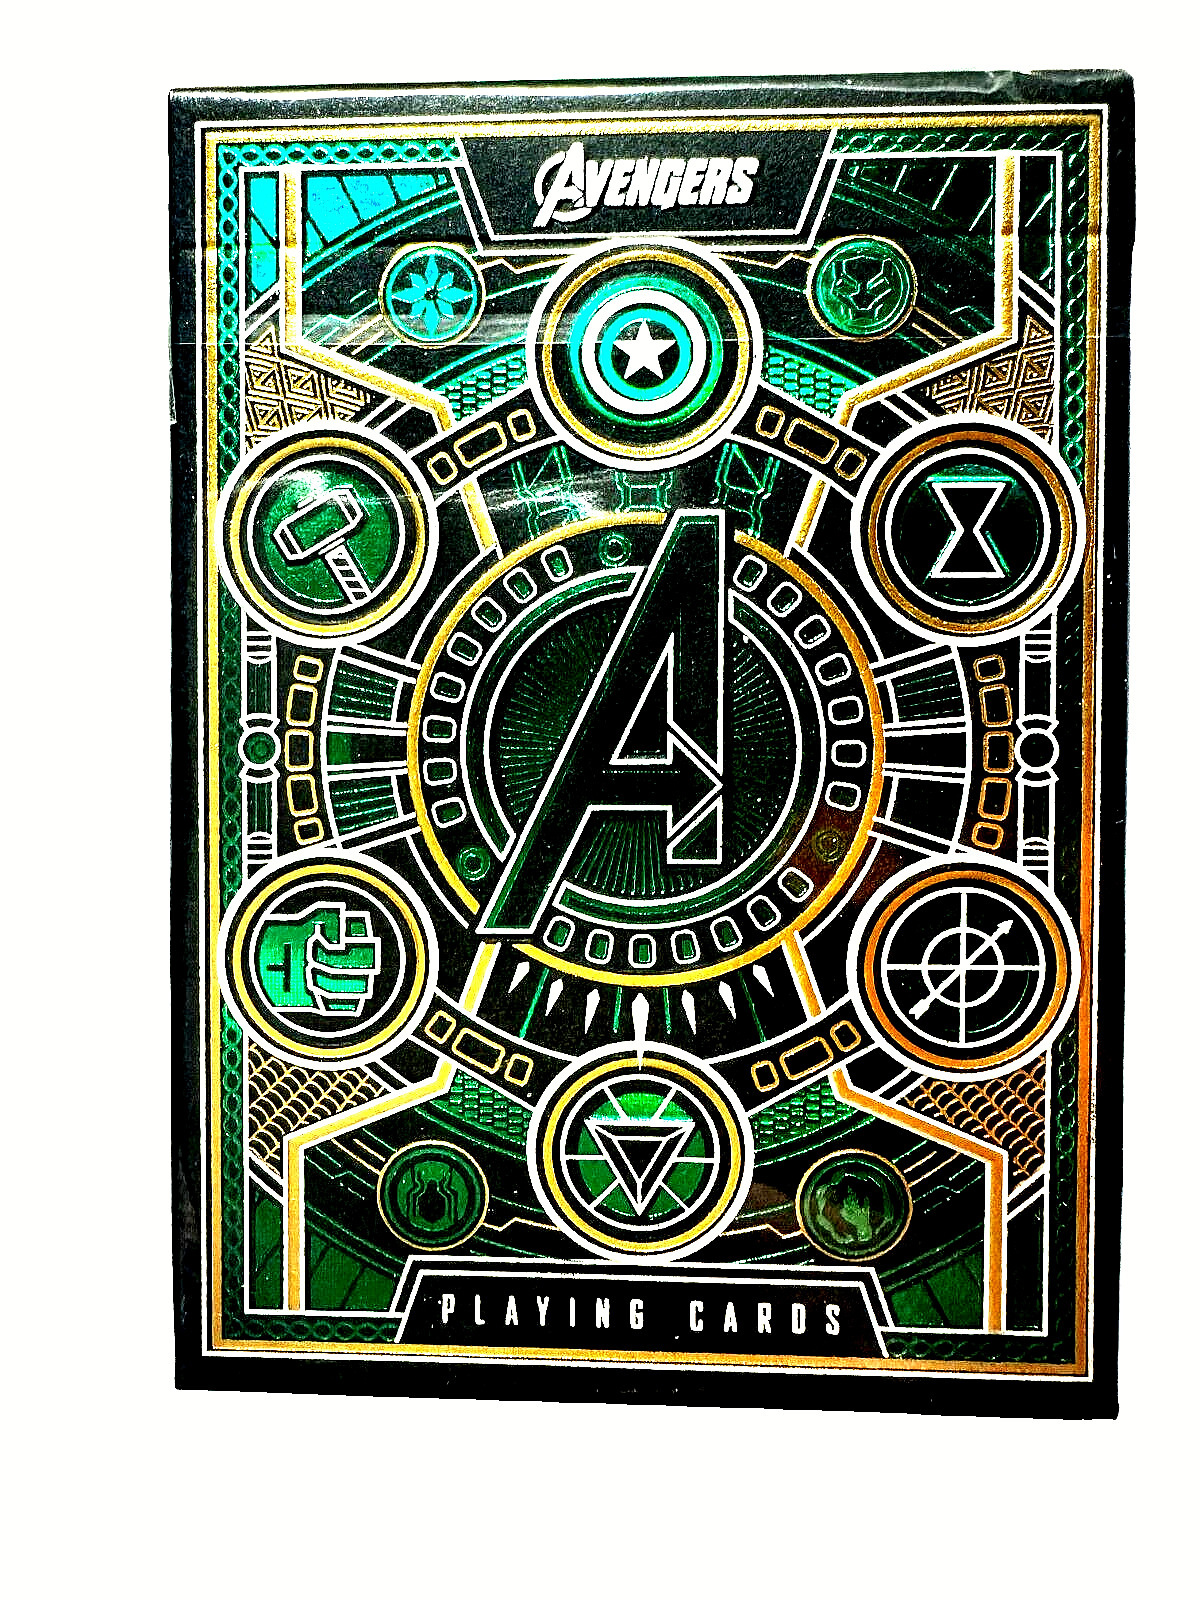 👍Avengers THEORY 11 52 PLAYING Card Deck CUSTOM ARTWORK LOW PRICE